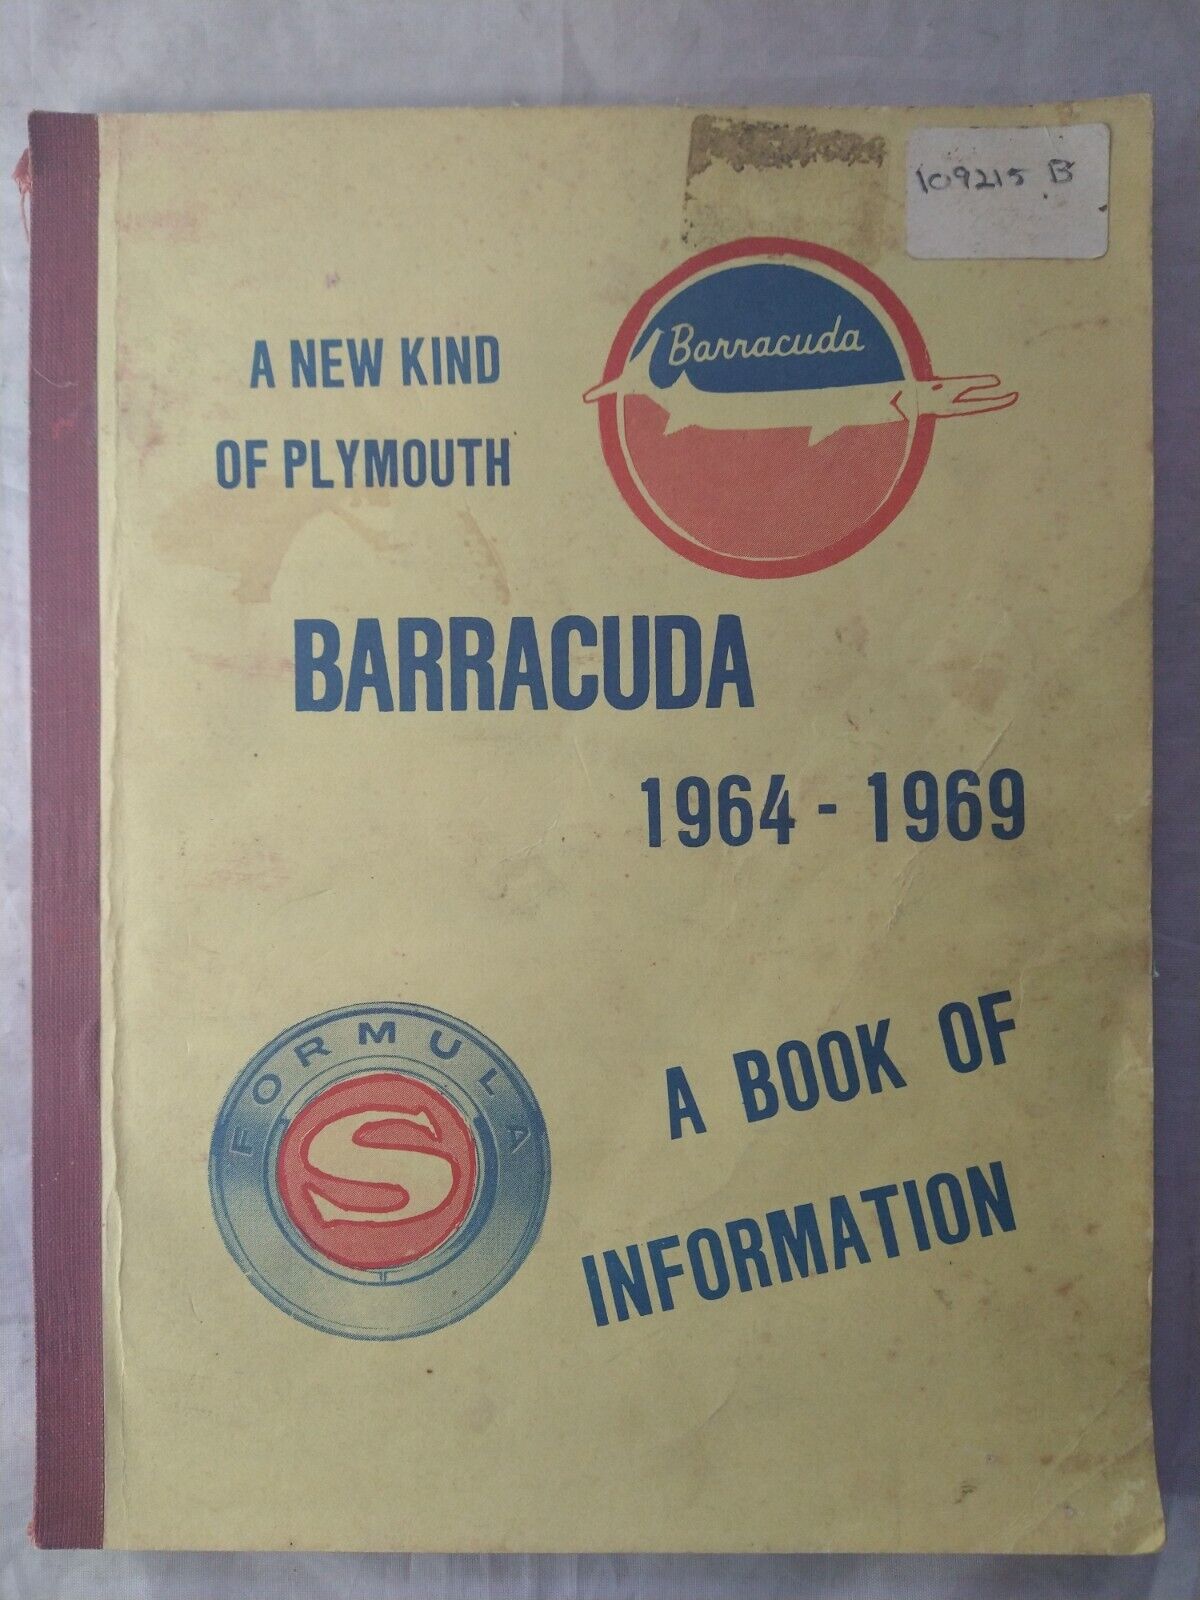 A New Kind of Plymouth Barracuda 1964-1969 Book of Information Paperback Vintage